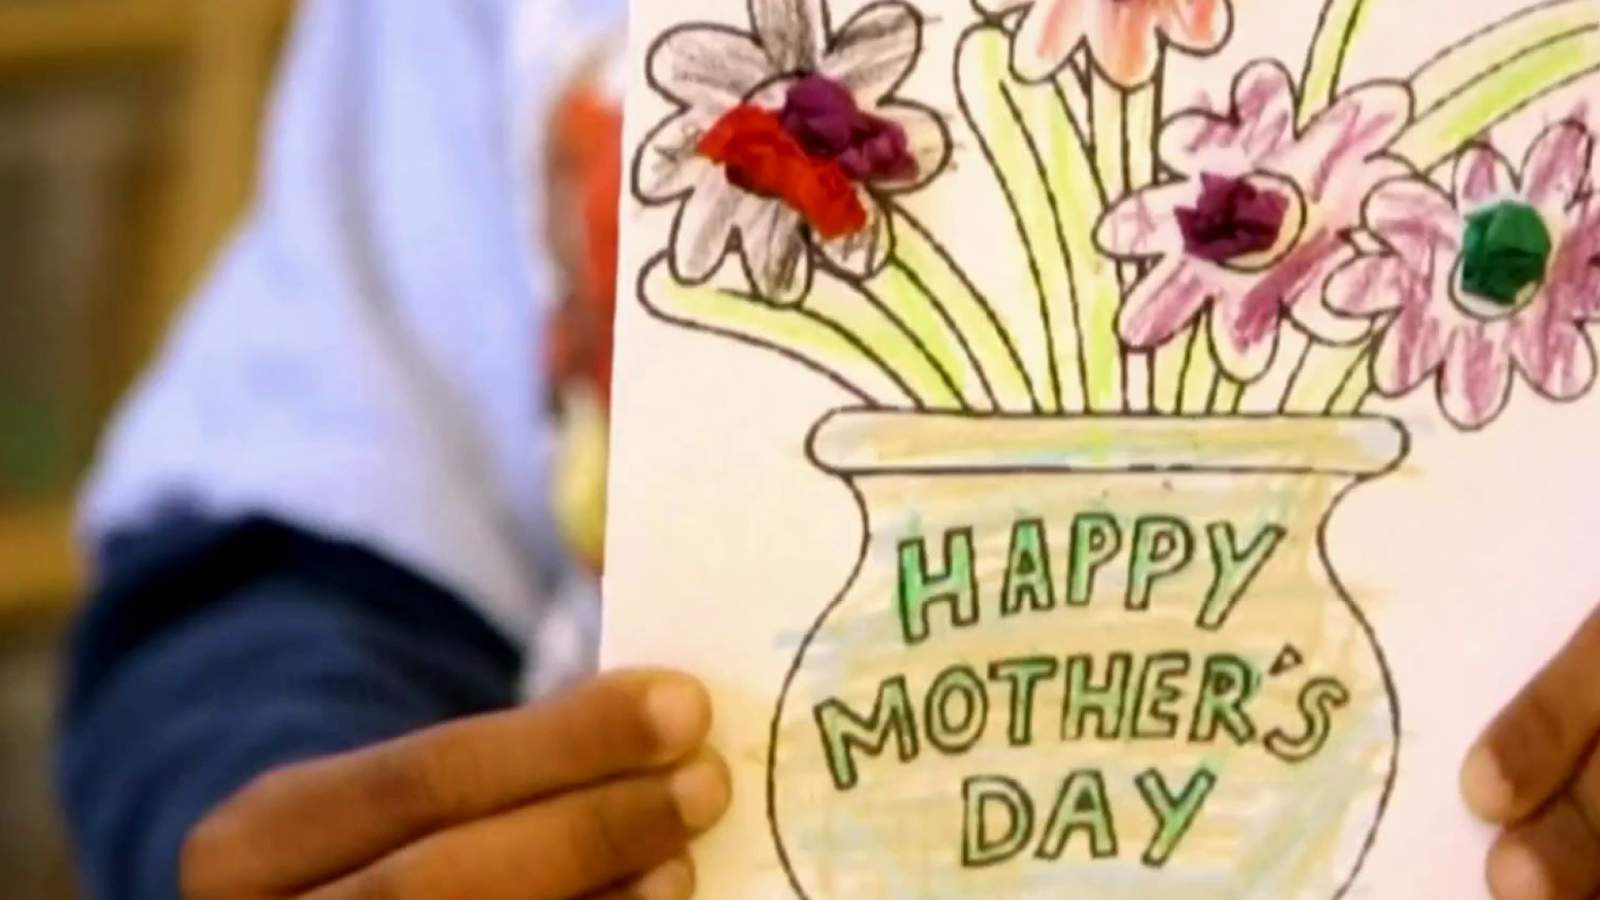 Health officials warn against Mother’s Day gatherings as coronavirus infections and deaths rise